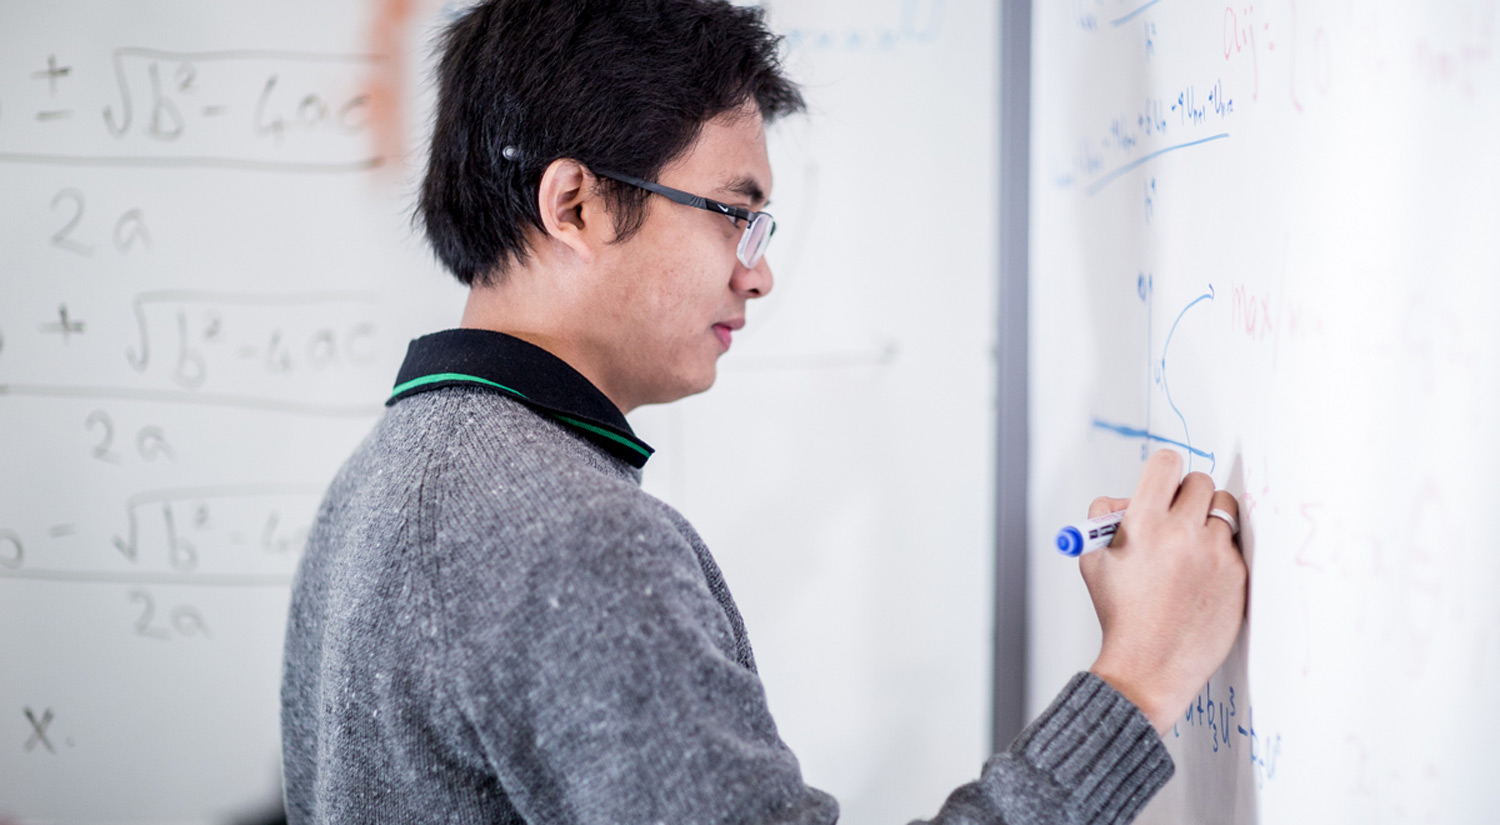 Image of a student working on a white board wall